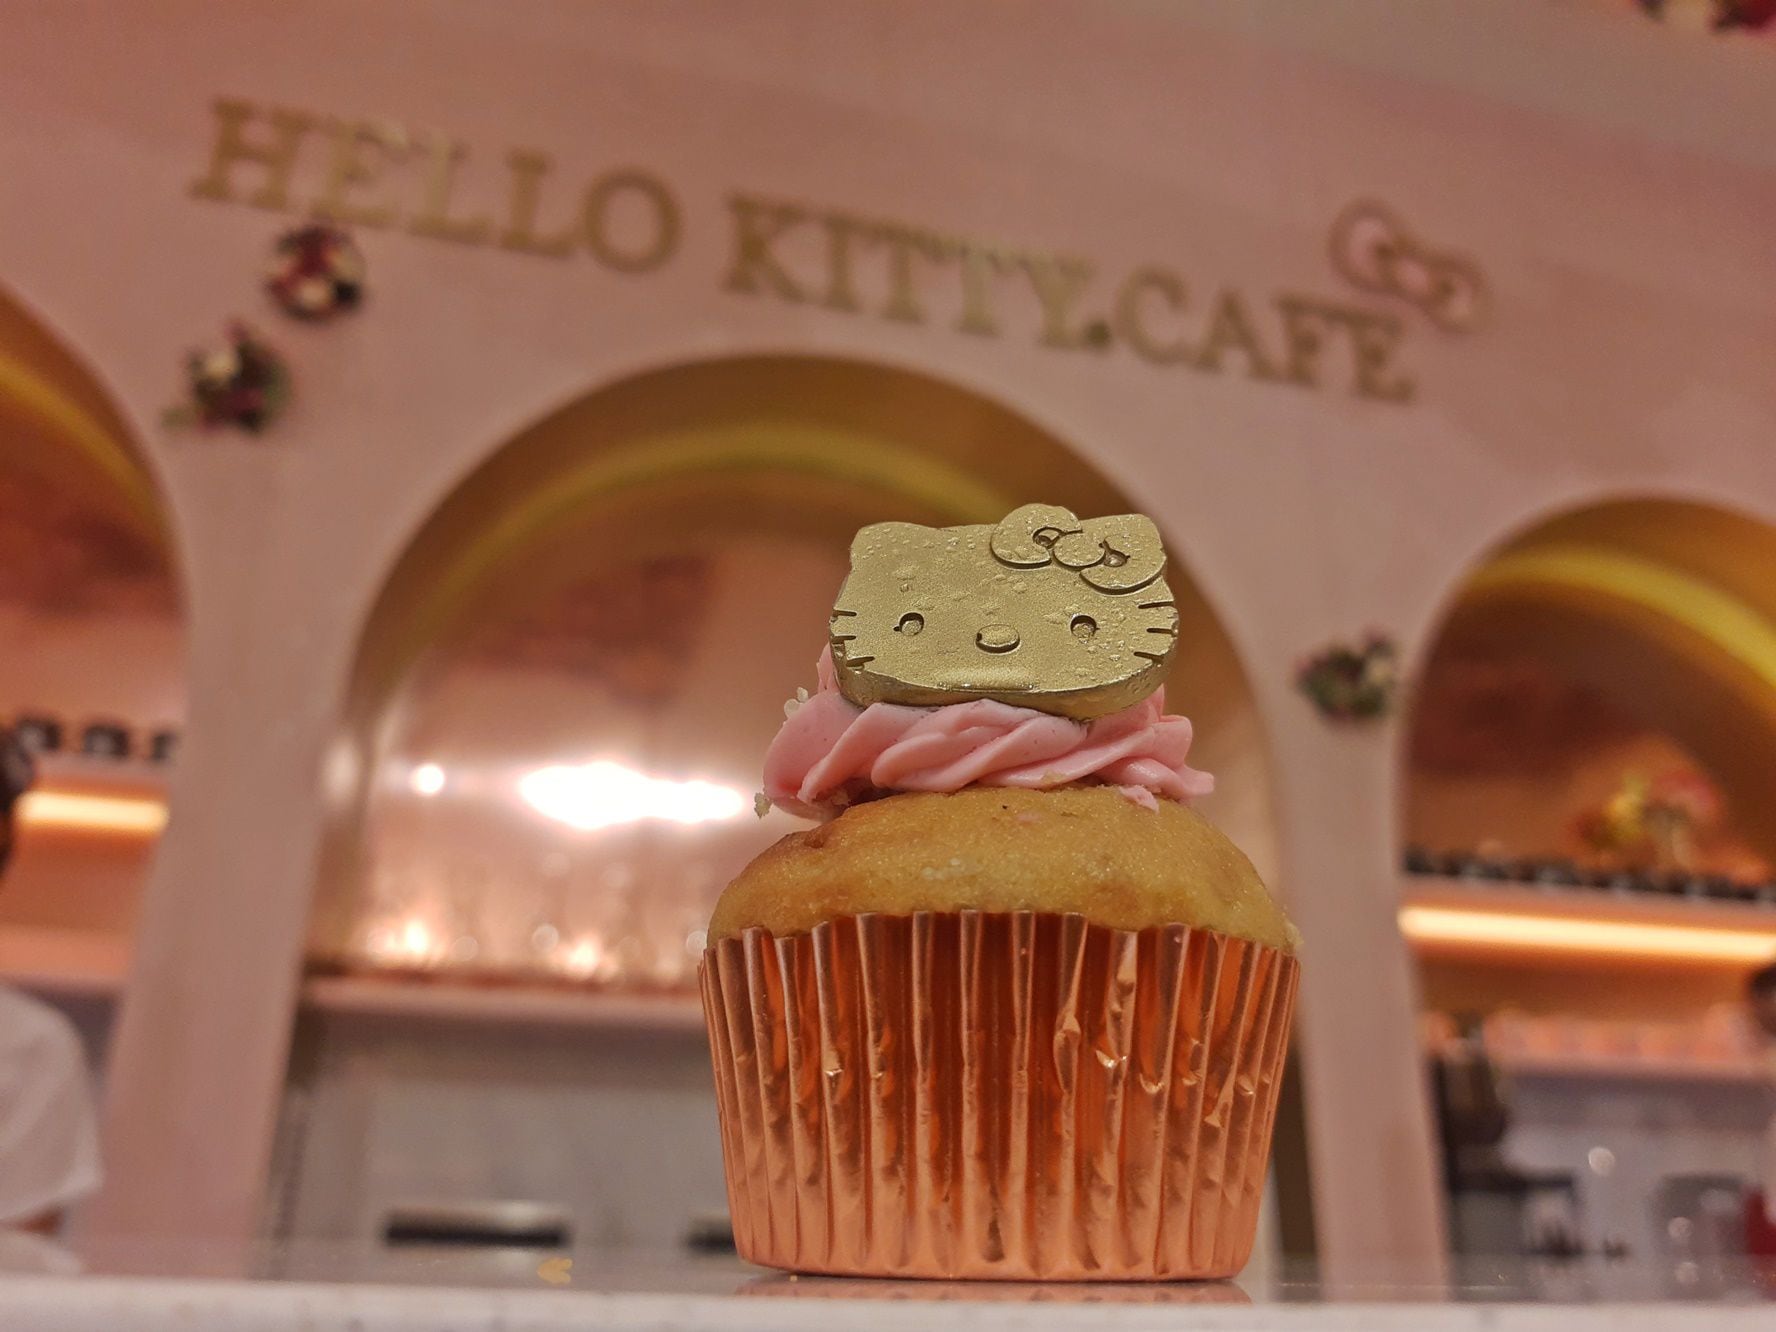 This is the first Hello Kitty Café in Mexico thumbnail